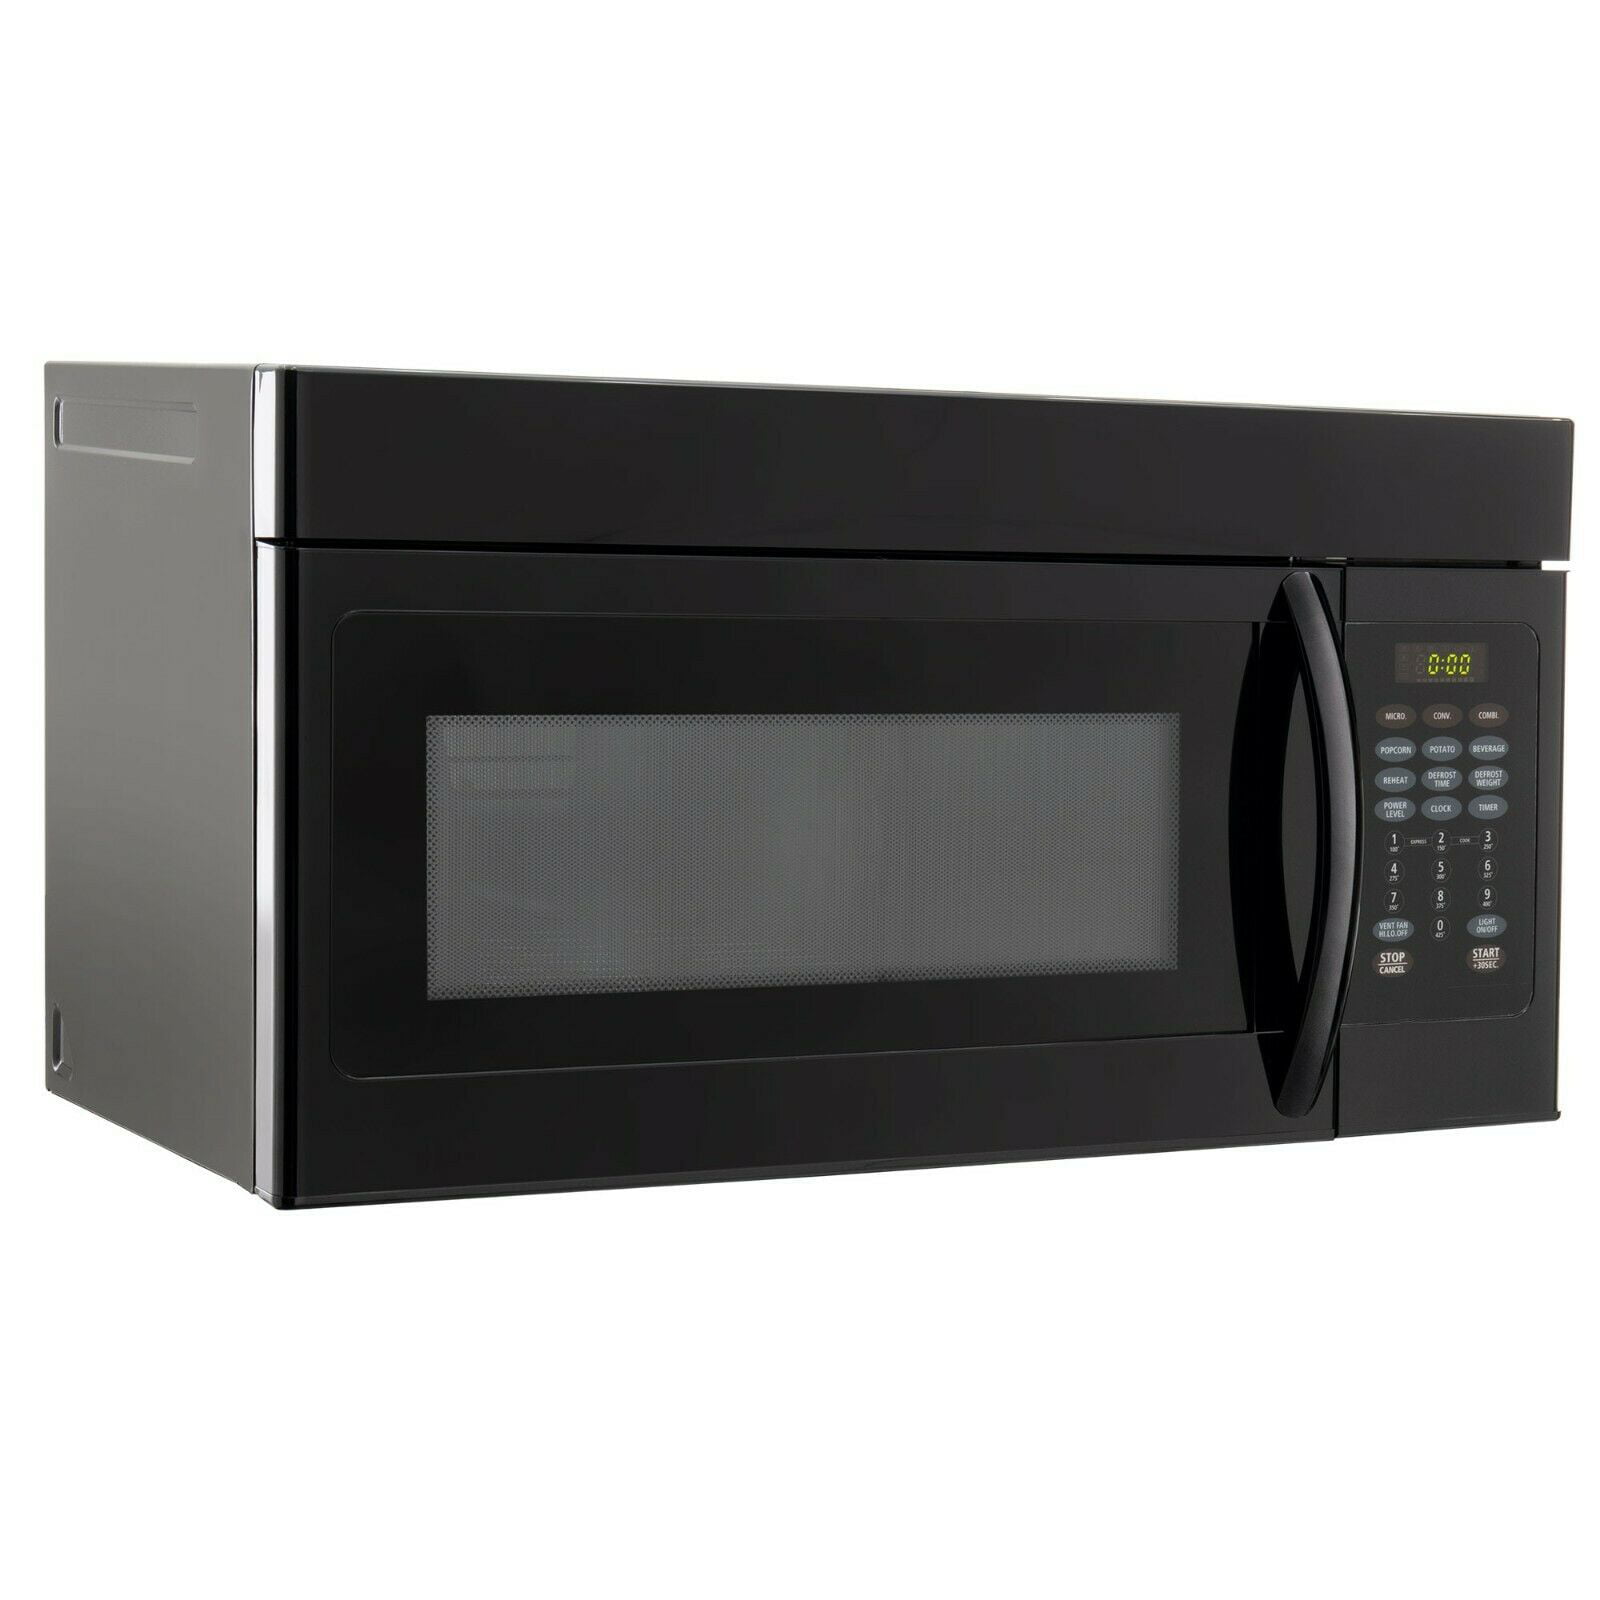 Rv Microwave Convection Oven Over The Range